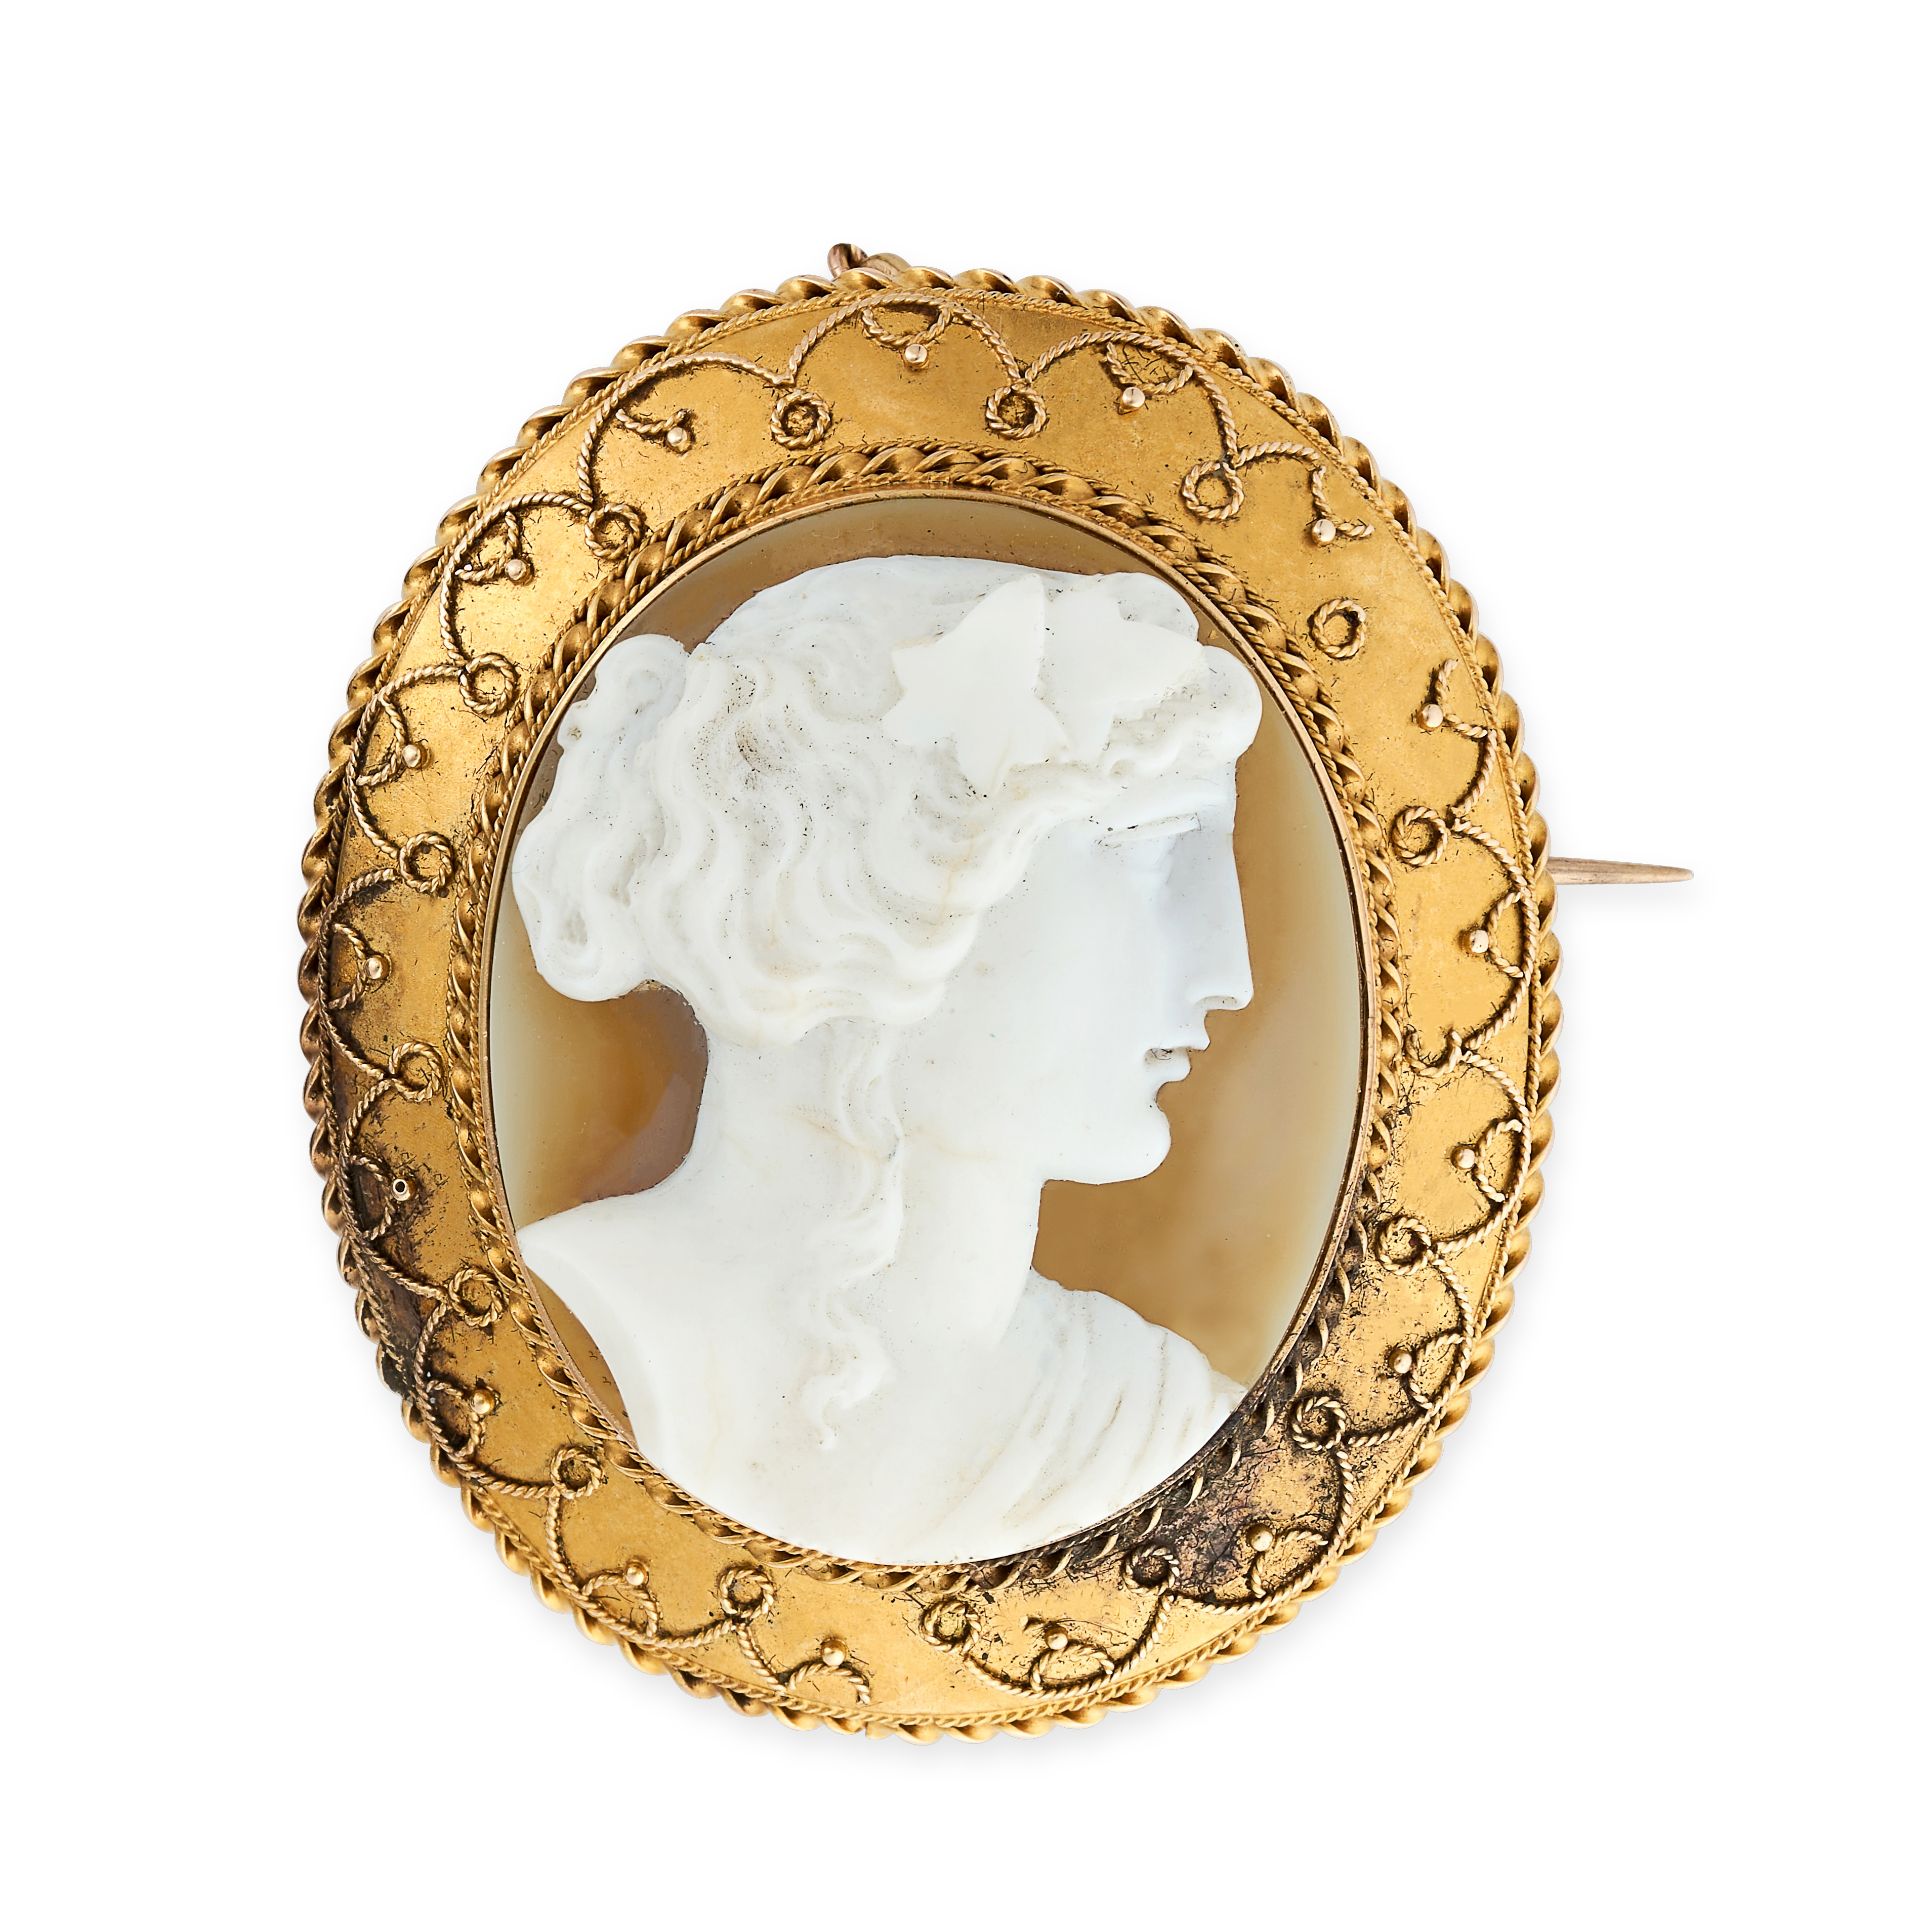 AN ANTIQUE AGATE CAMEO BROOCH in yellow gold, set with an oval agate cameo carved to depict the p...